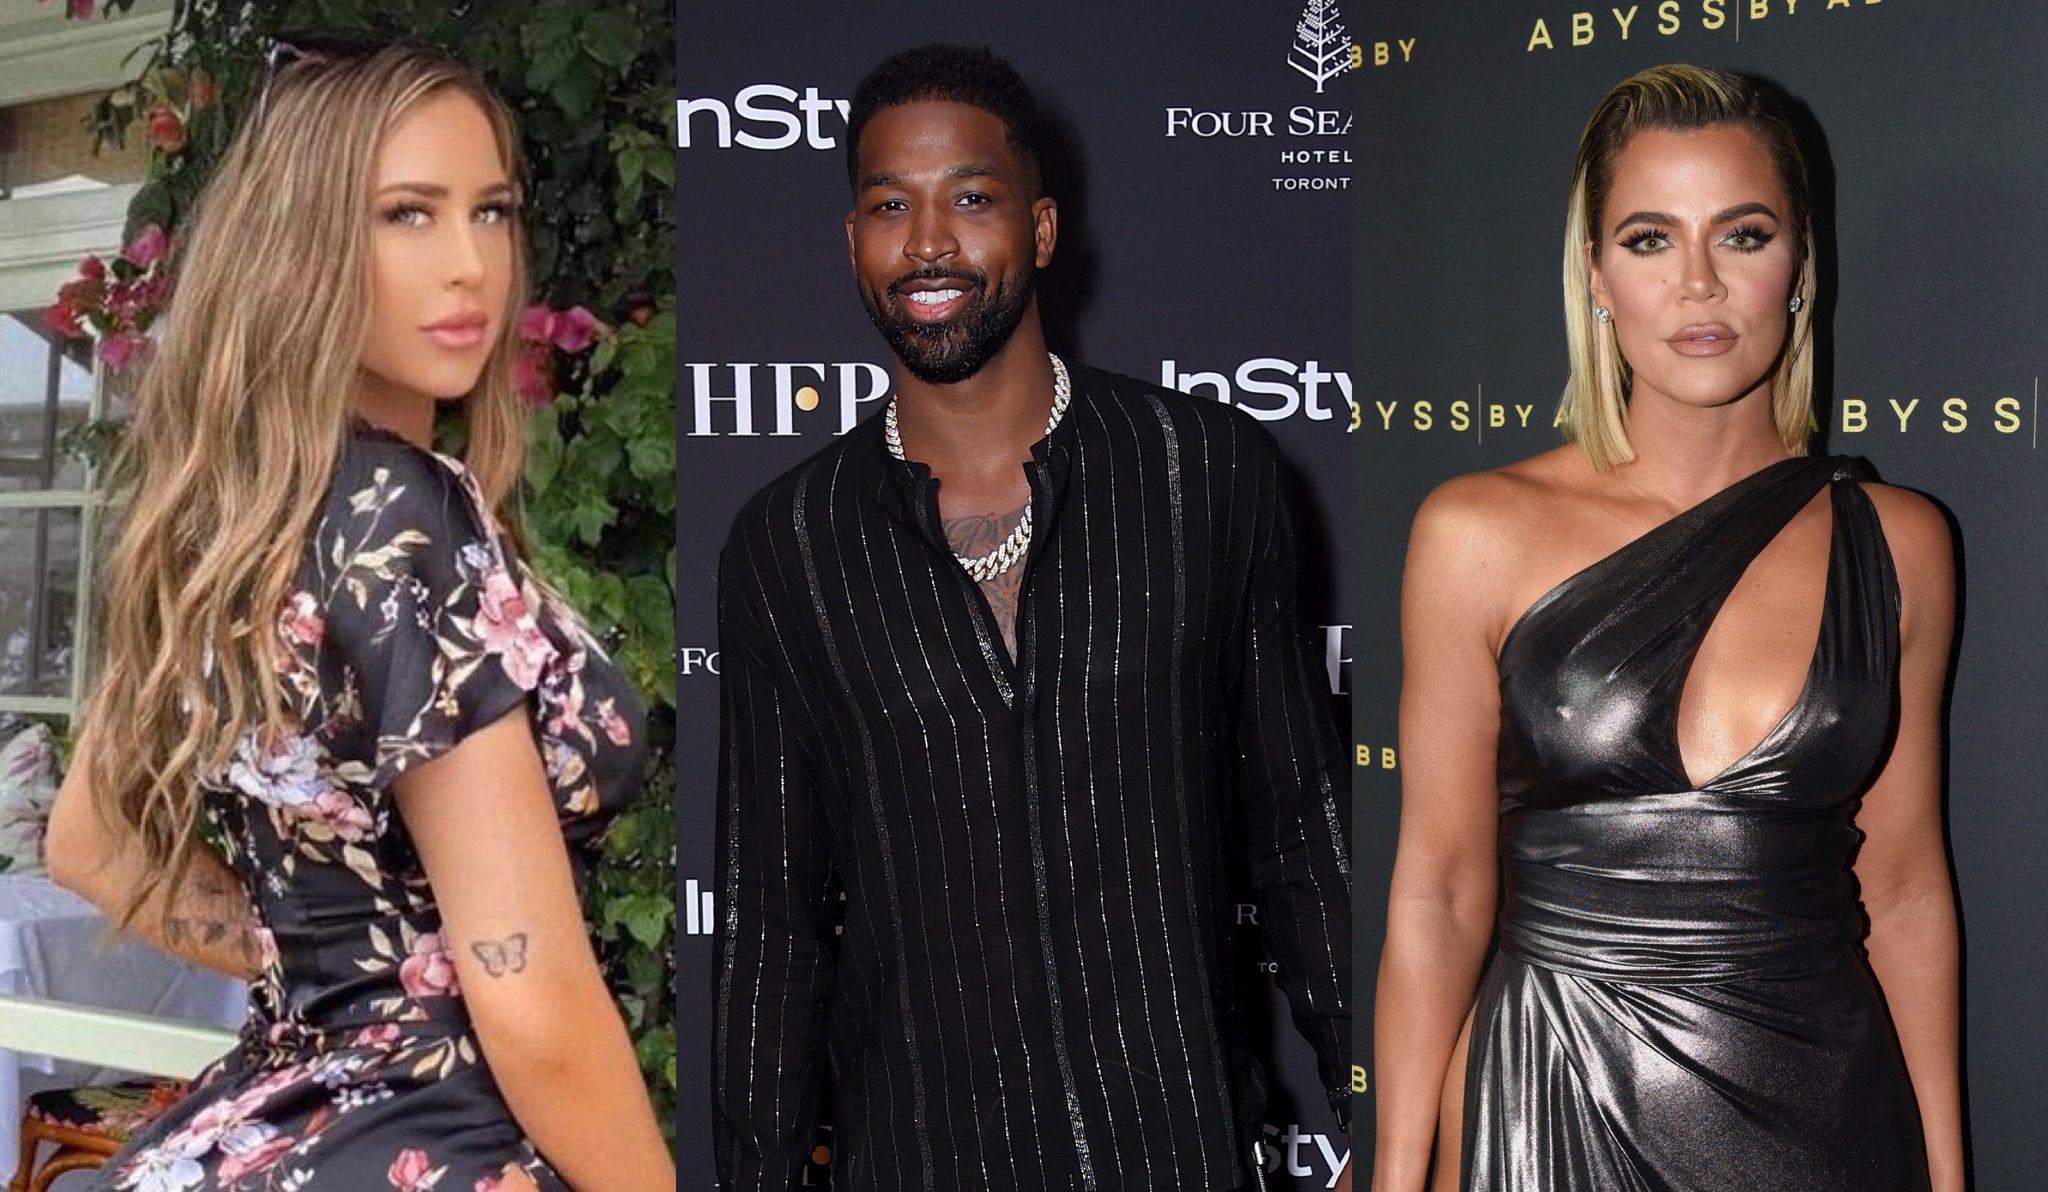 Tristan Thompson Apologizes To Khloé Kardashian After Paternity Test Proves He Fathered Child With Maralee Nichols